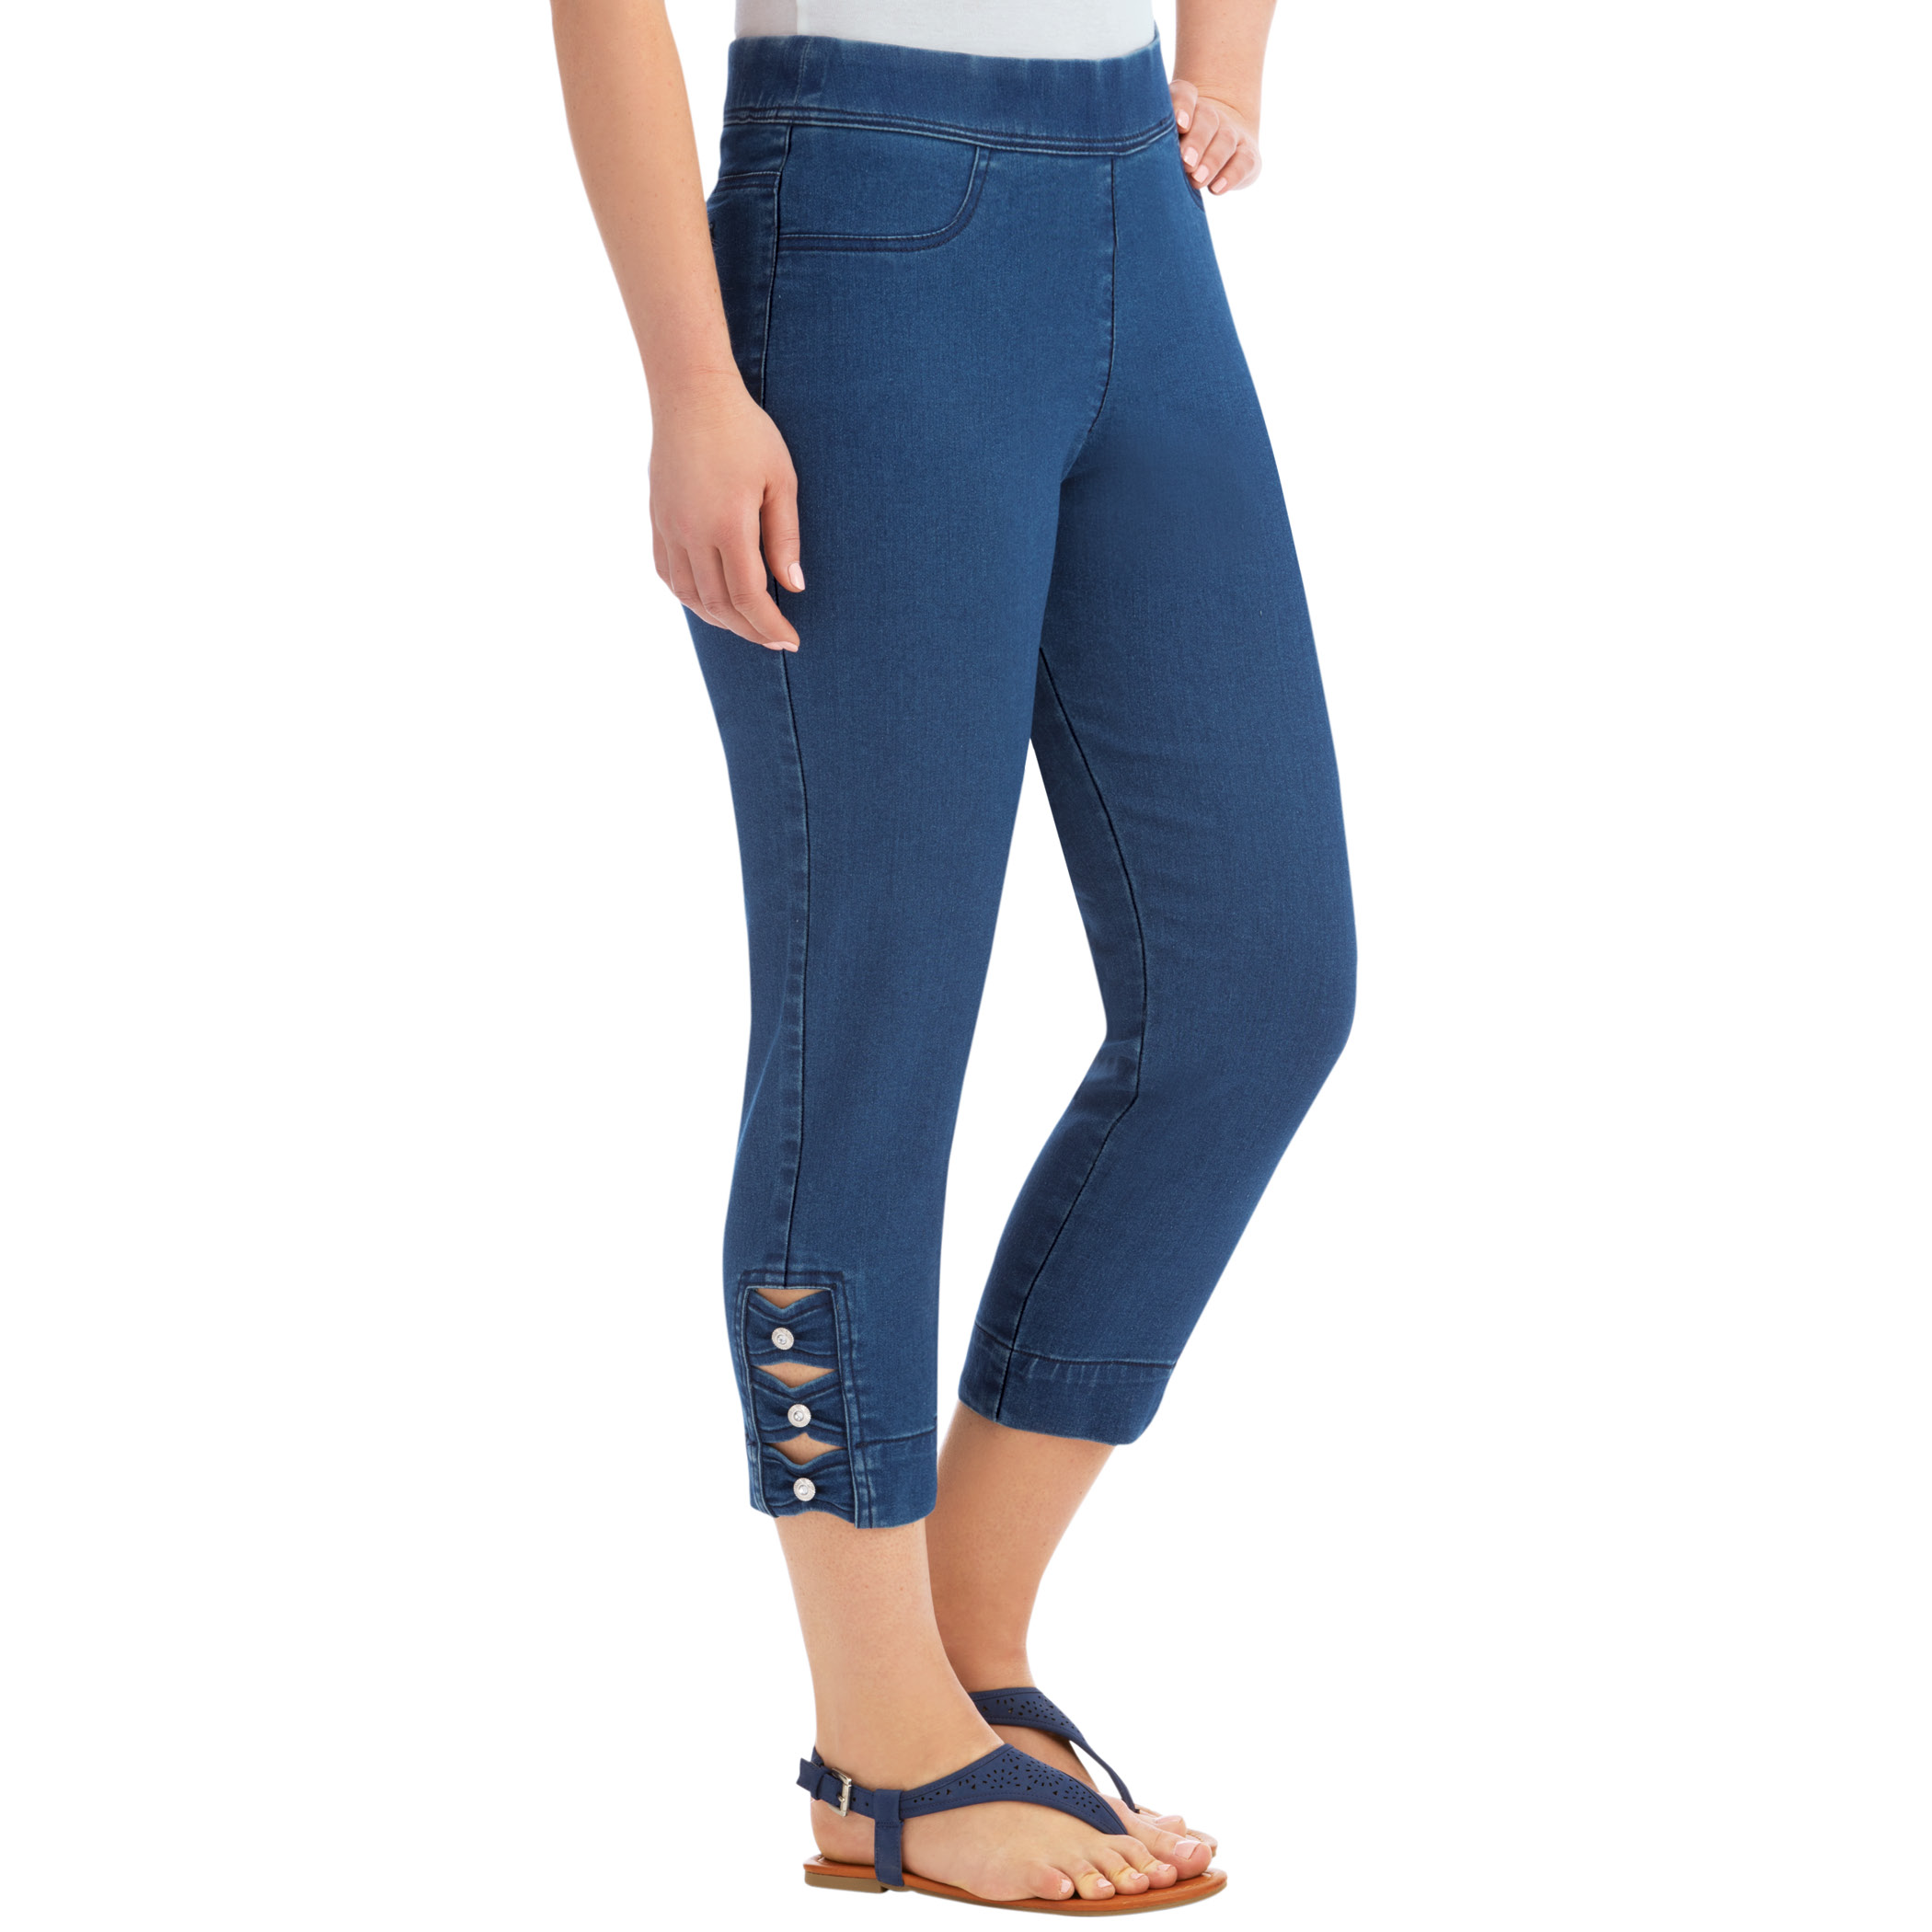 Collections Etc Elastic Waist Pull-on Denim Capri Jean Pants with Decorative Button Detail - image 2 of 4